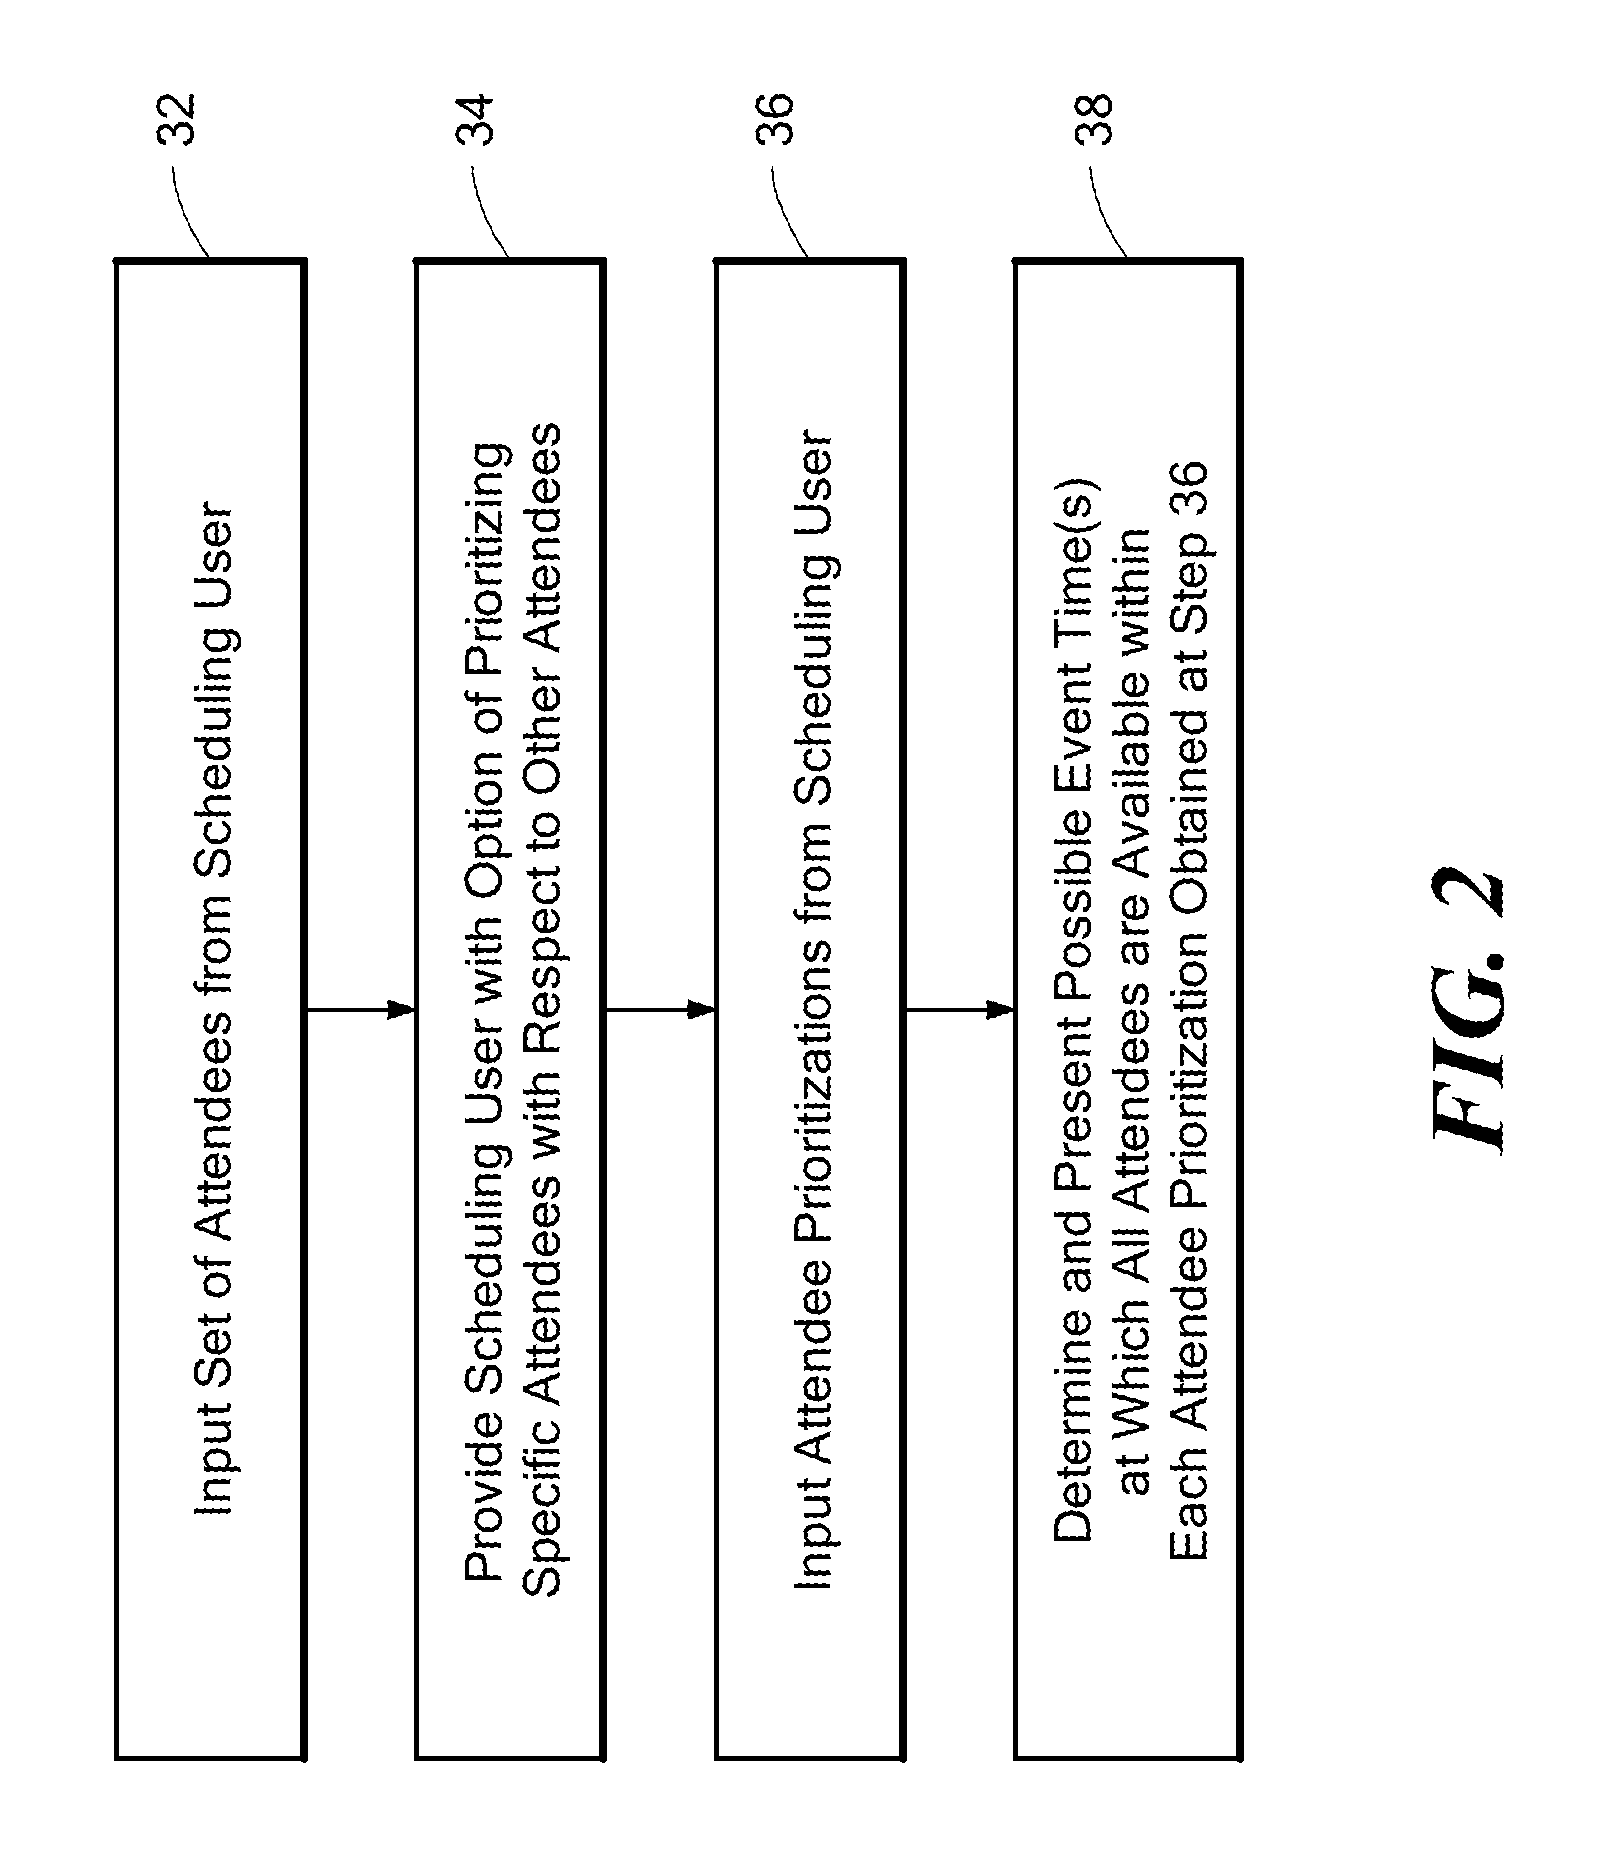 Method and system for prioritizing meeting attendees